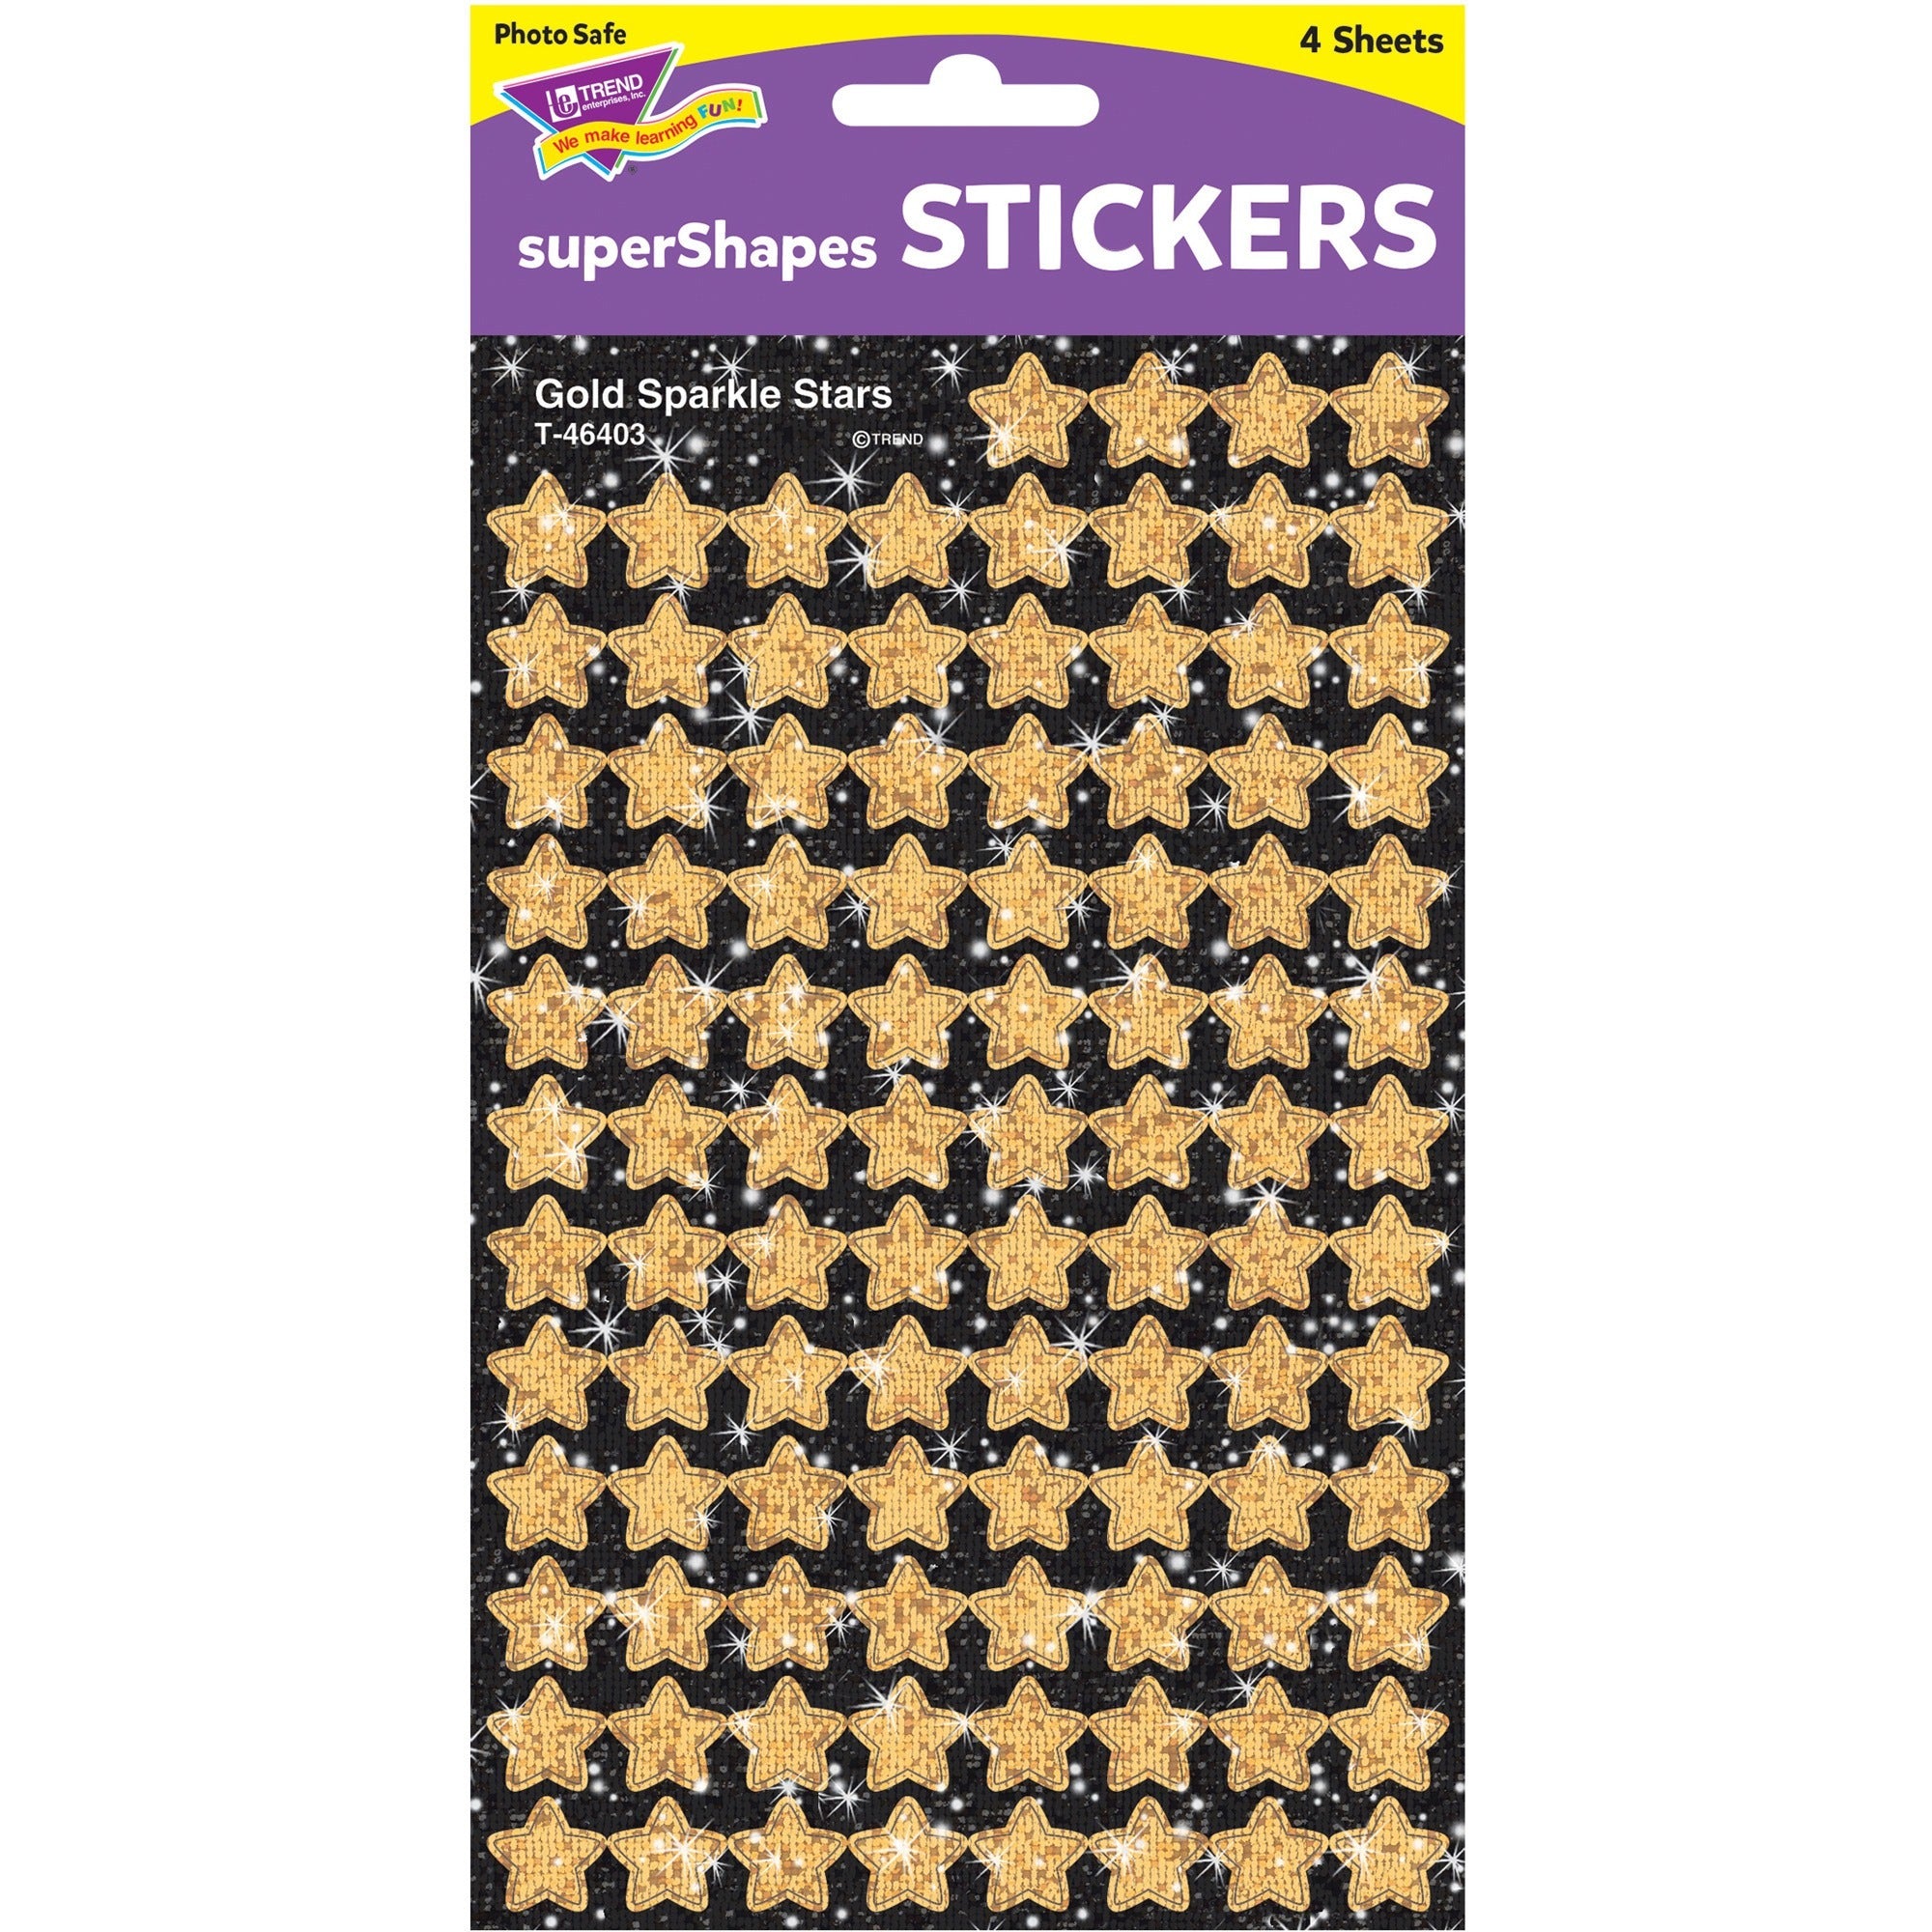 Trend Gold Sparkle Stars superShapes Stickers - Sparkle Stars Shape - Self-adhesive - Acid-free, Fade Resistant, Non-toxic, Photo-safe - Gold - 400 / Pack - 